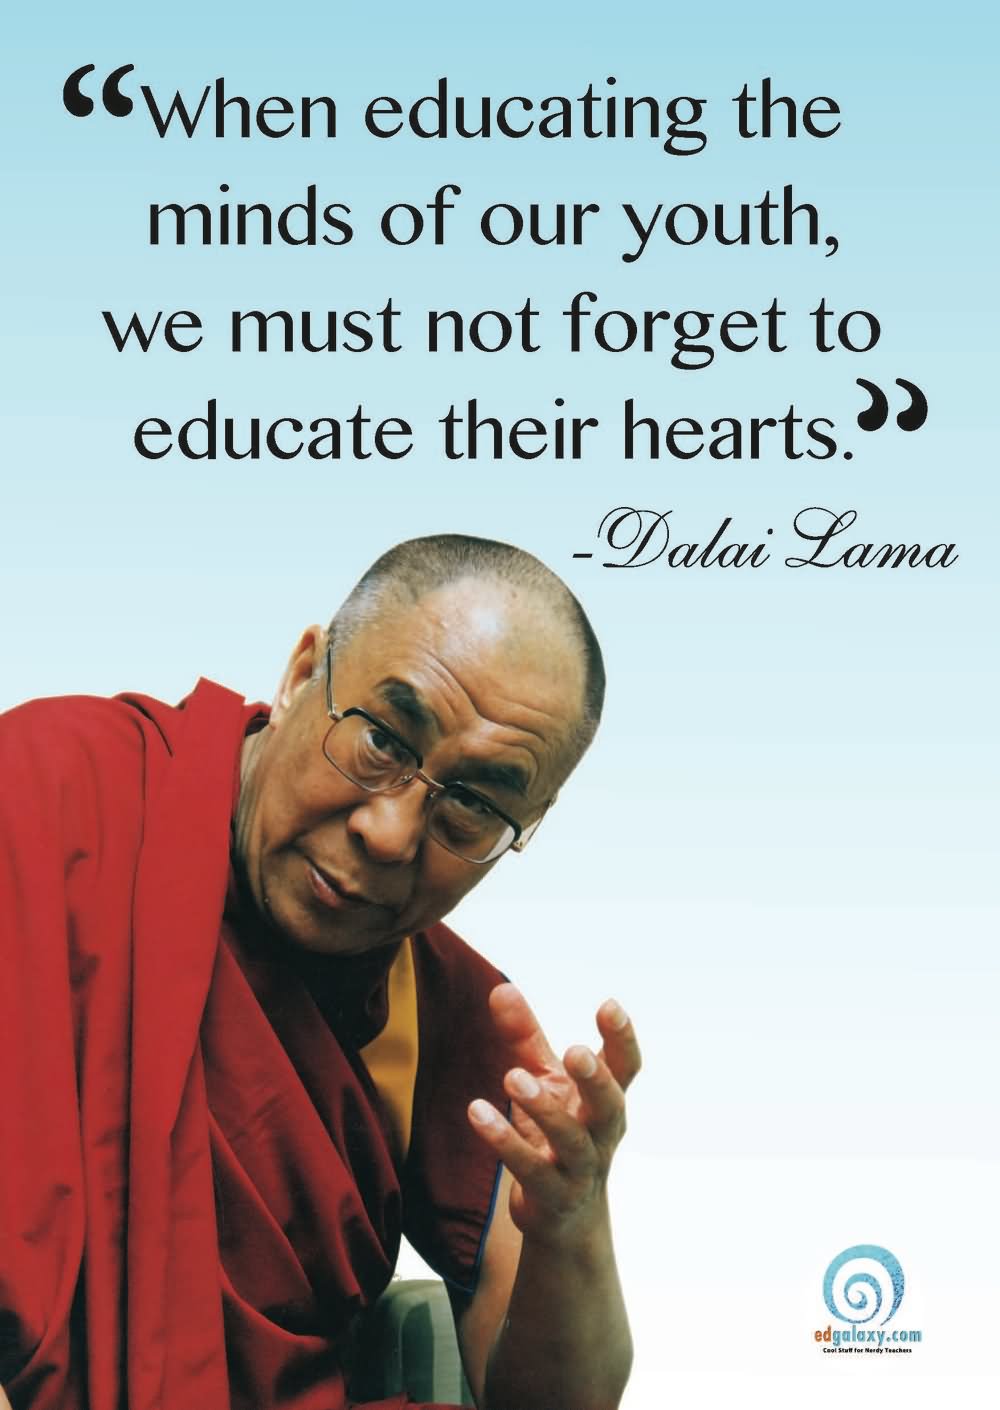 When educating the minds of our youth, we must not forget to educate their hearts. -  Dalai Lama